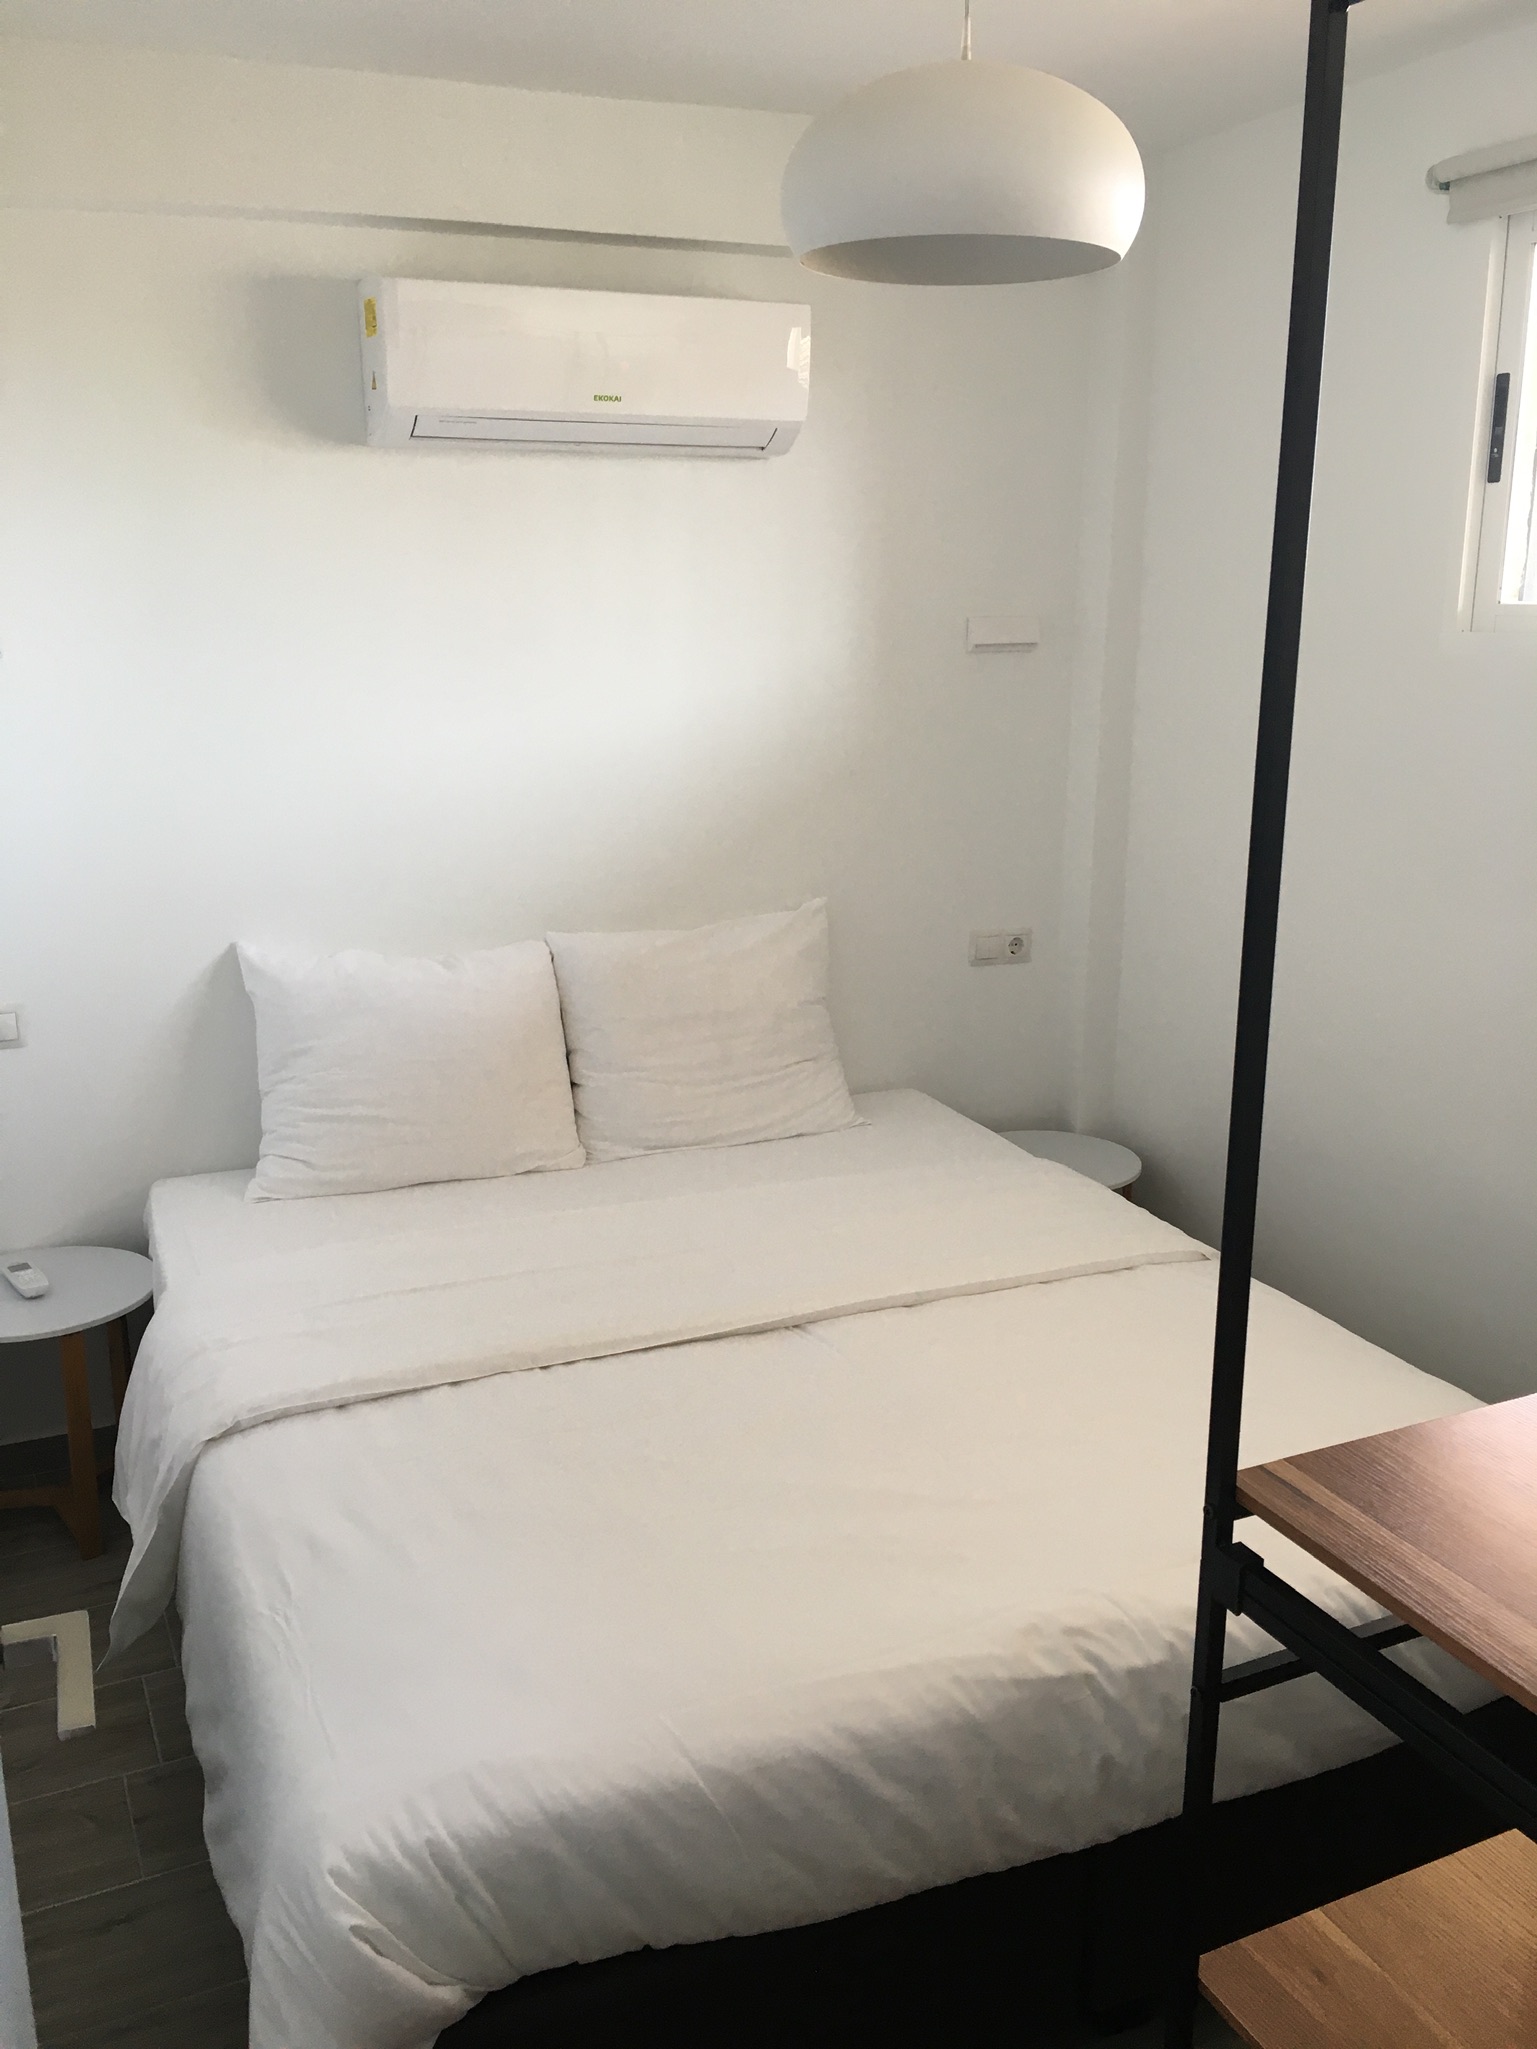 Bedroom 2 and Airco